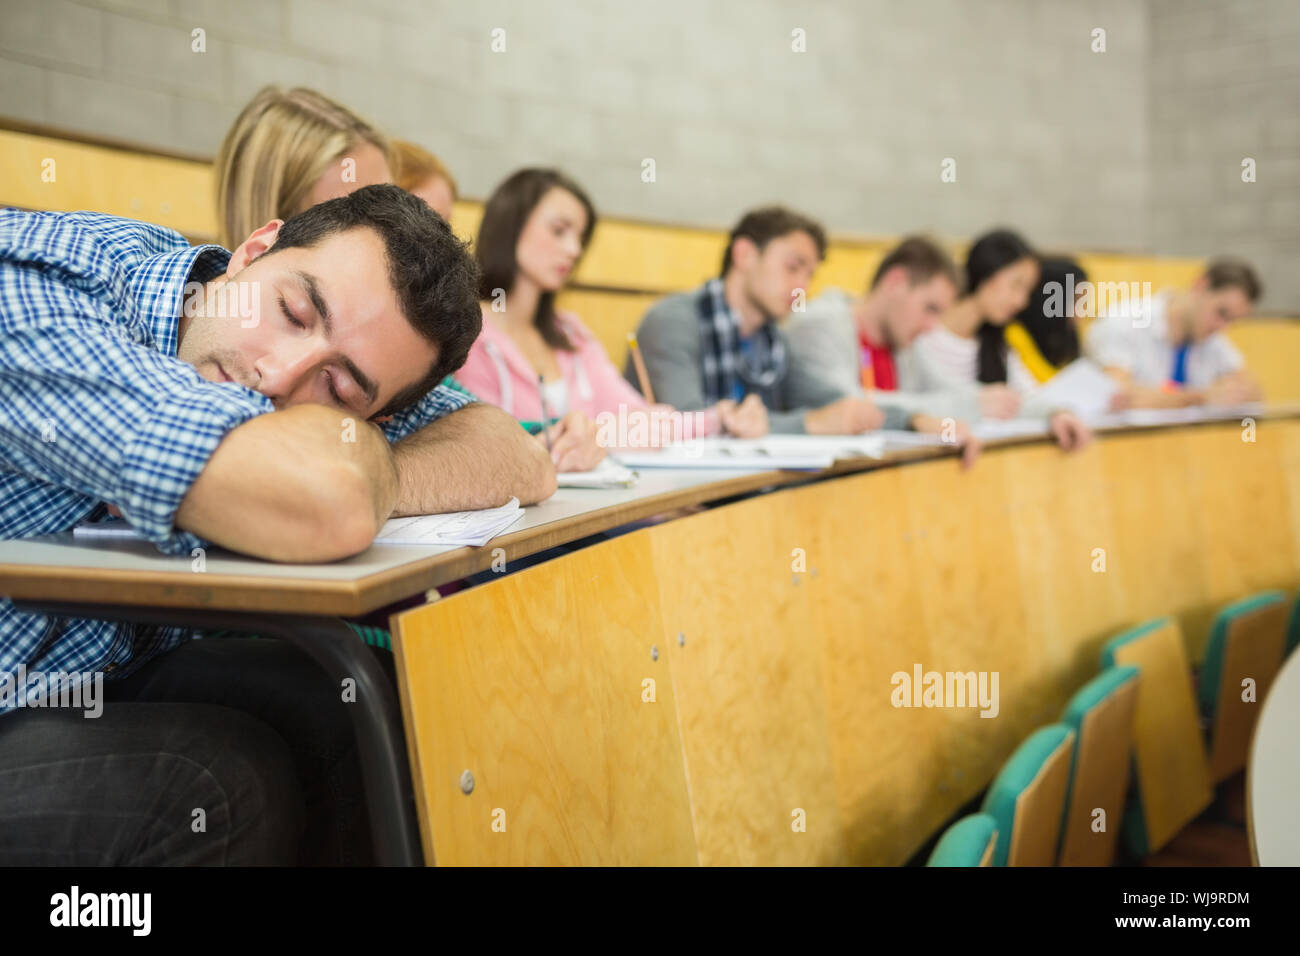 Male sleeping with students sitting in the college lecture hall Stock Photo